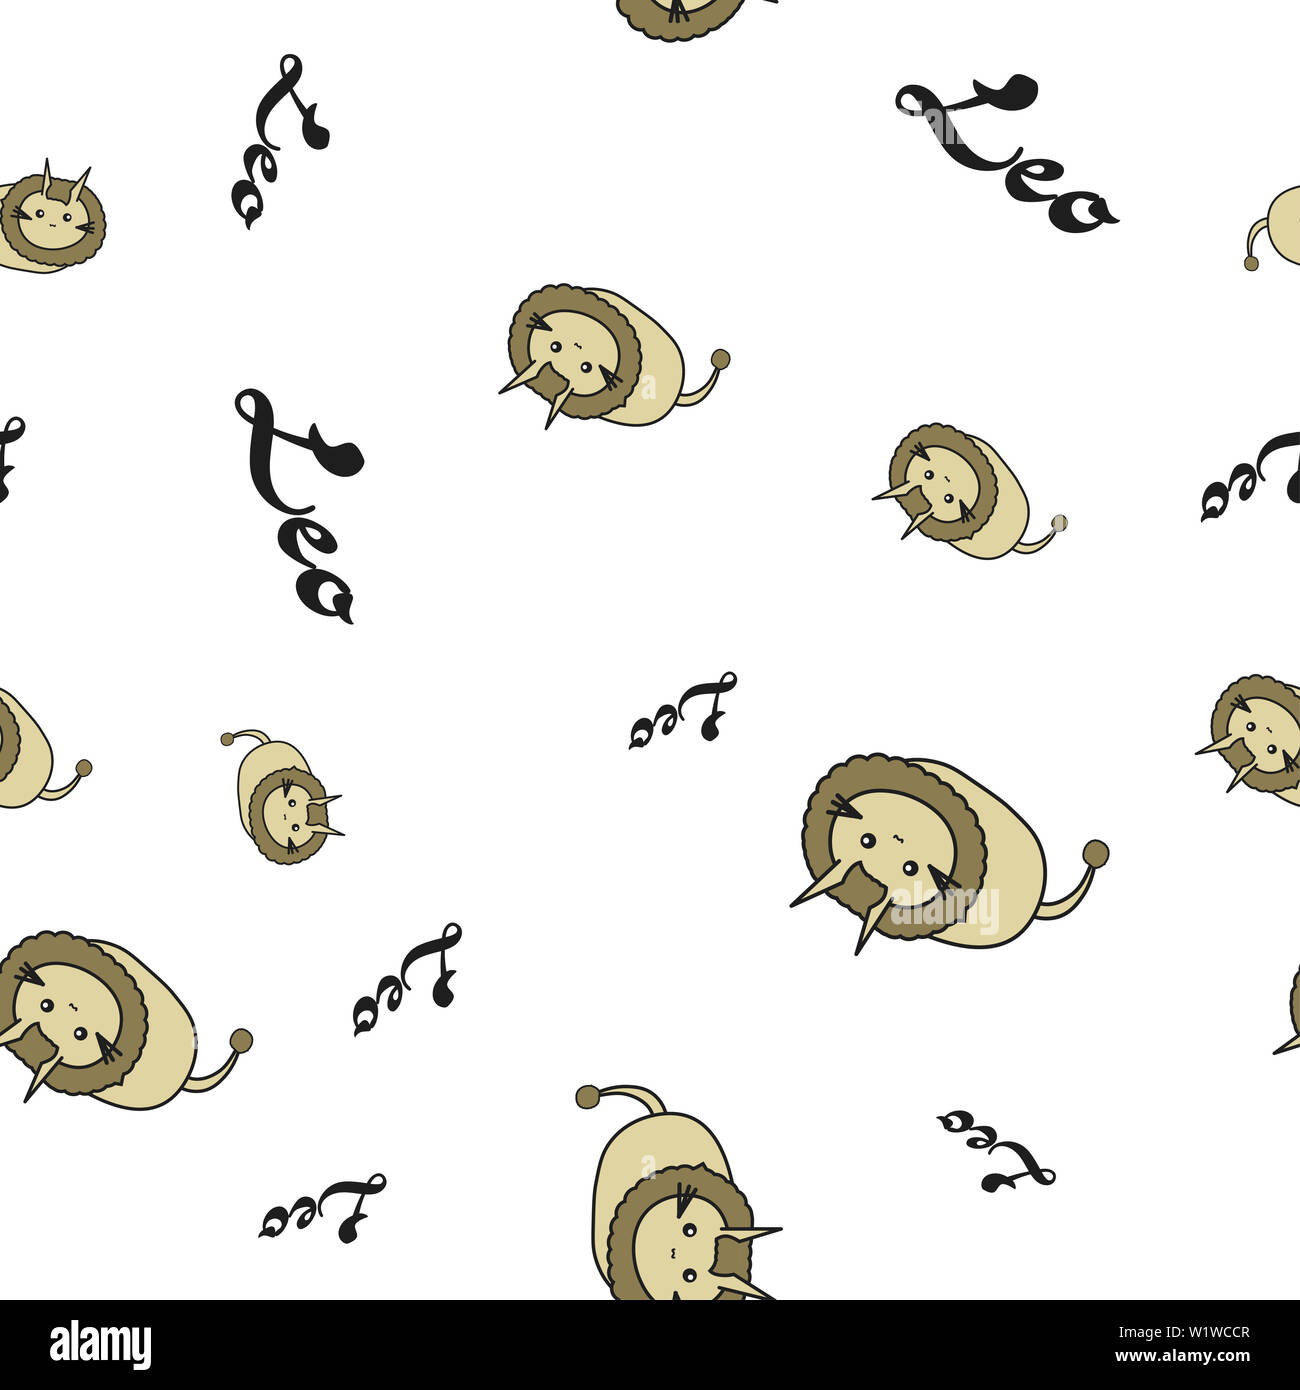 Seamless pattern of cartoon bunnies denoting leo zodiac signs with text.  illustration on white background. Stock Photo